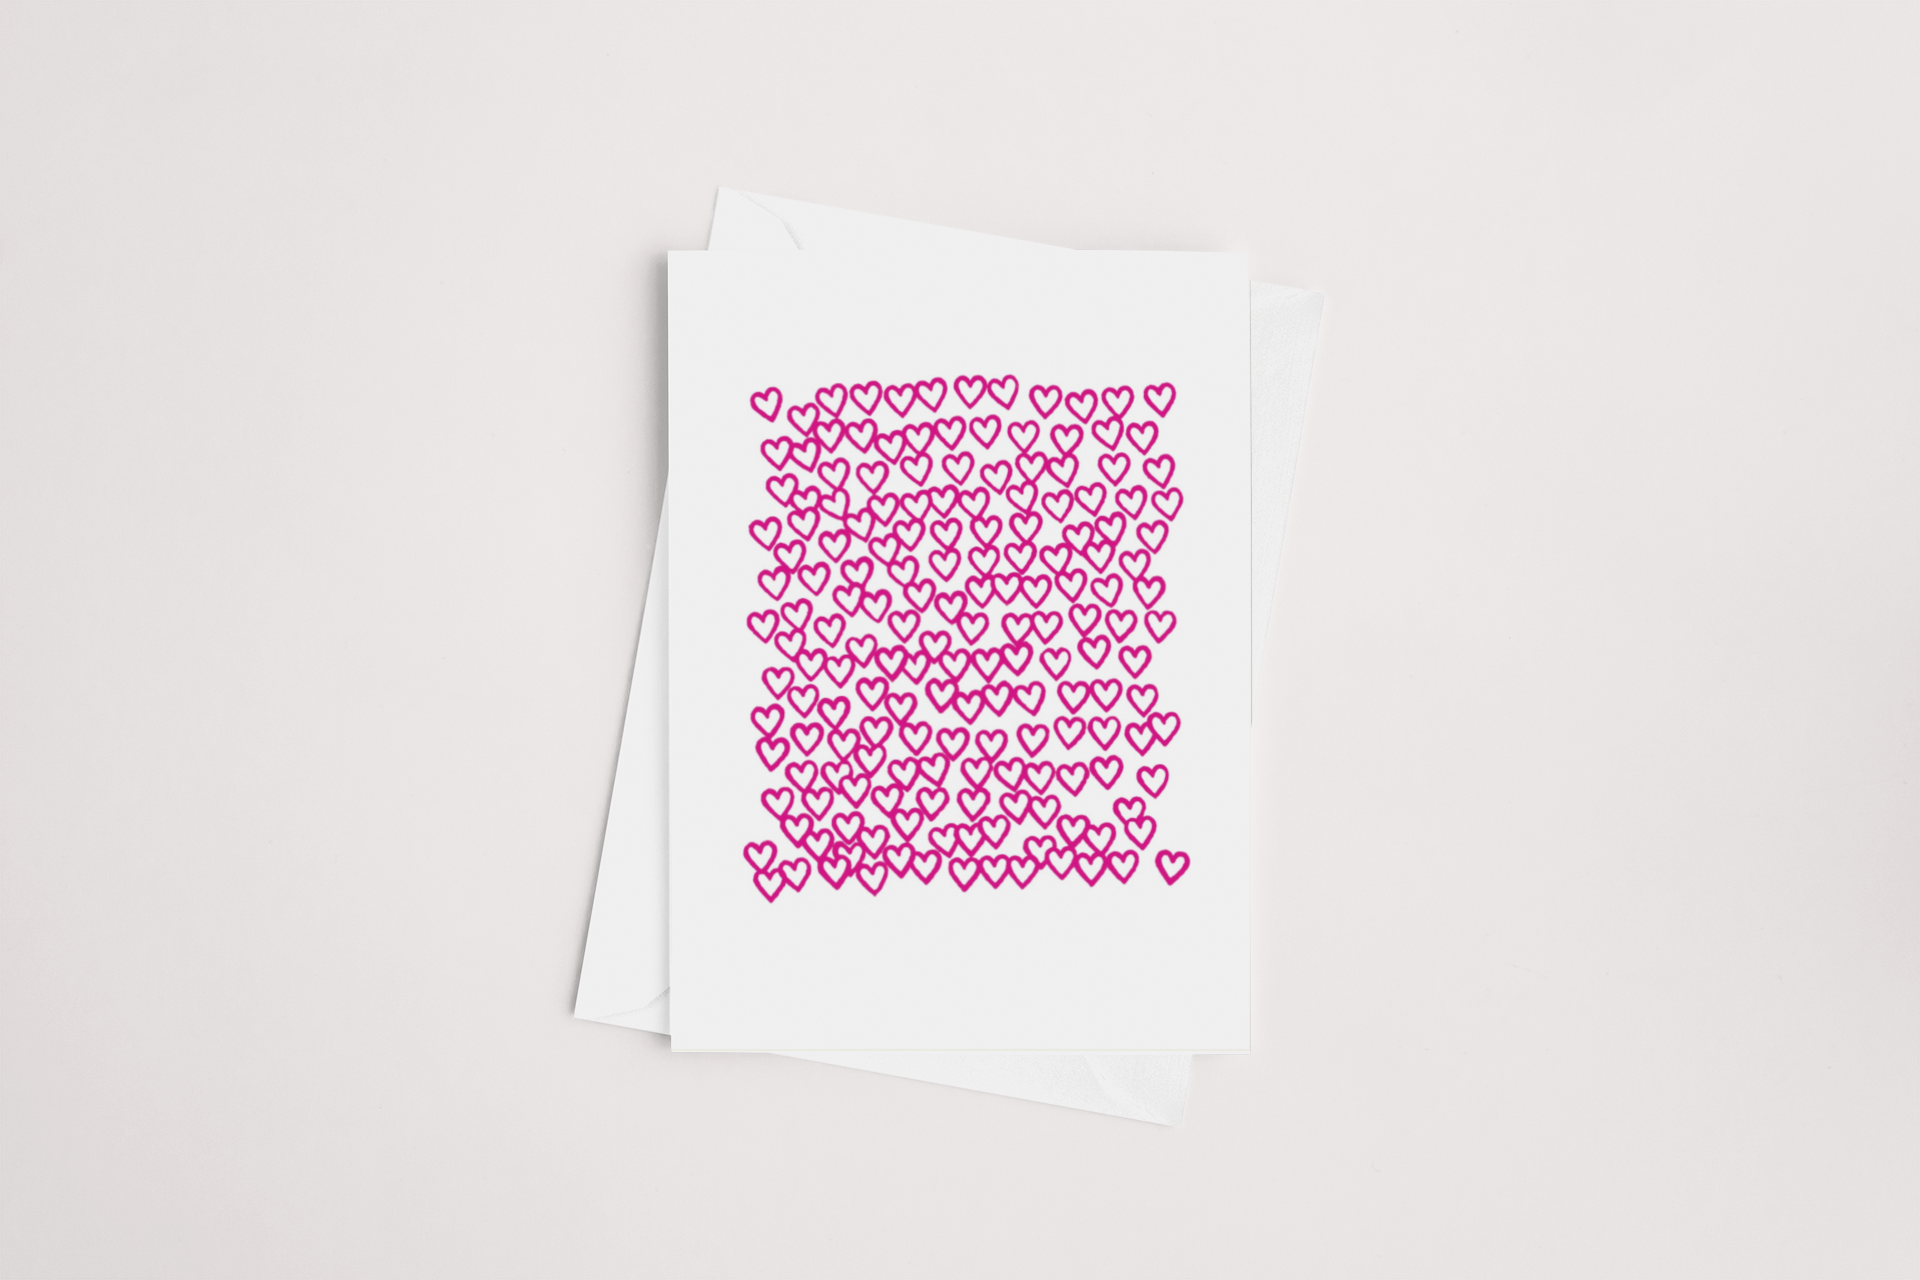 A Pink Hearts Card with a qr code made of pink hearts on a plain white background by Tuesday Print.